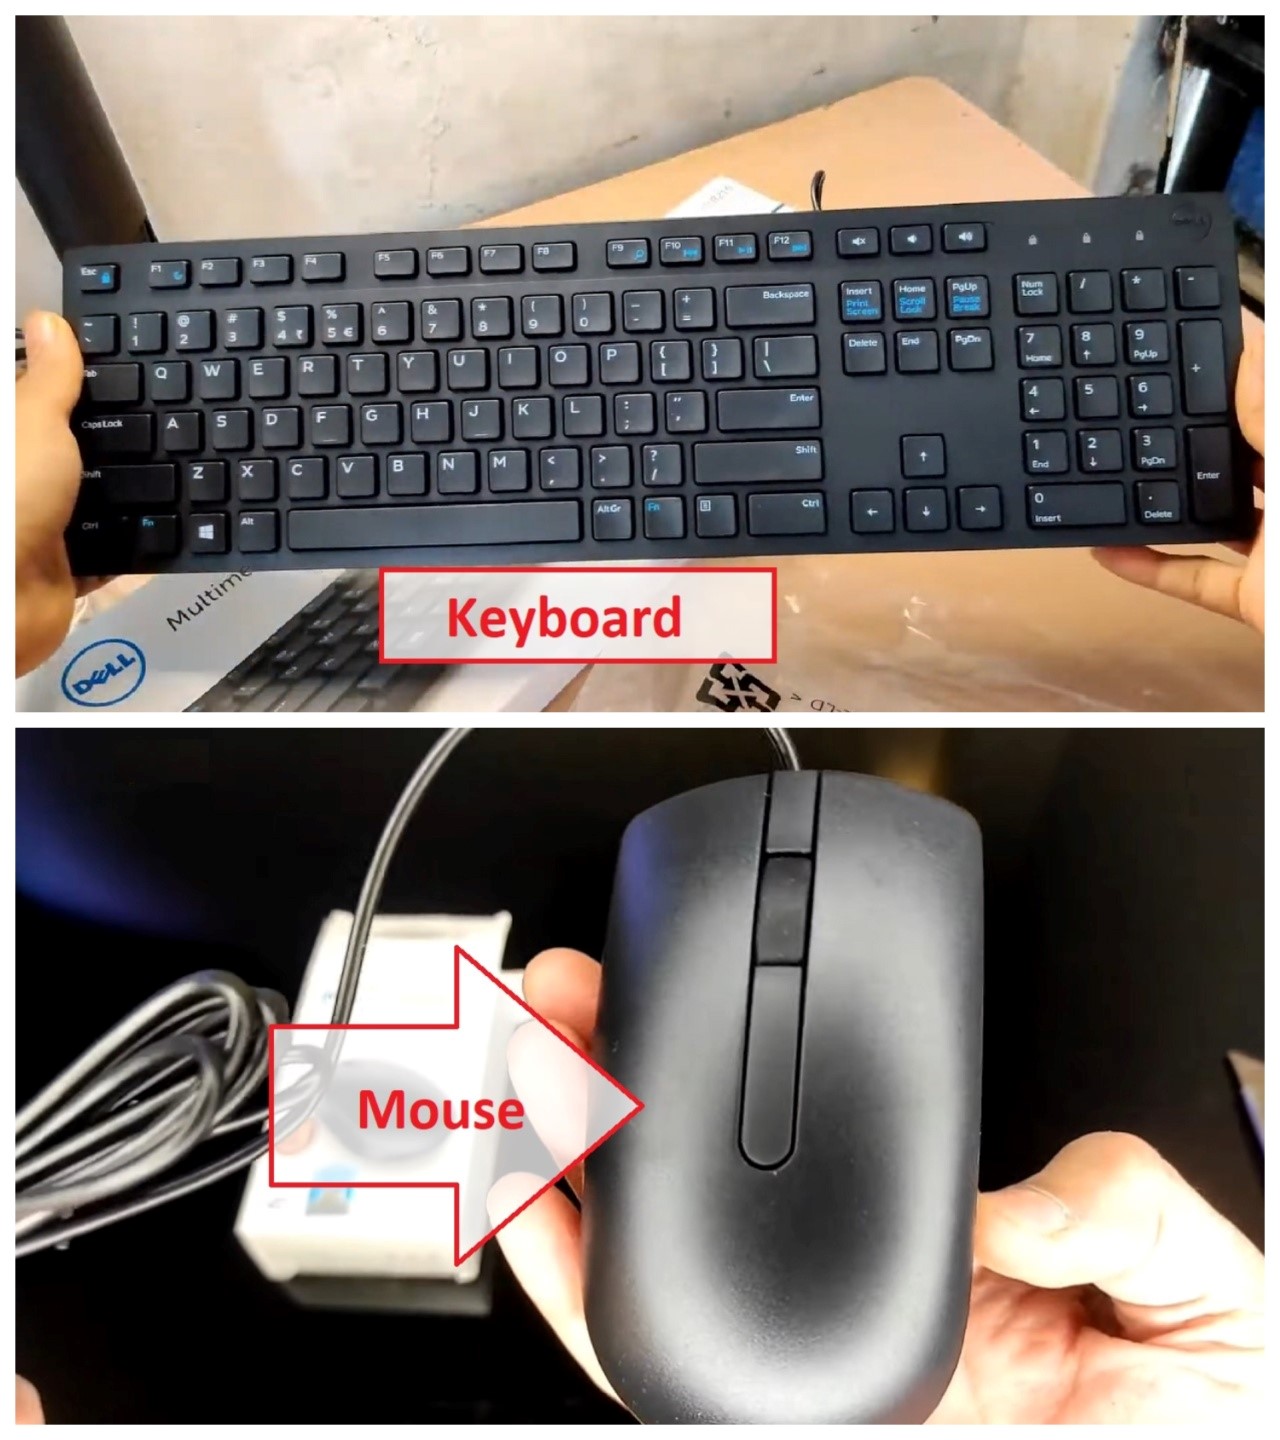 Dell OptiPlex 790 Keyboard and Mouse